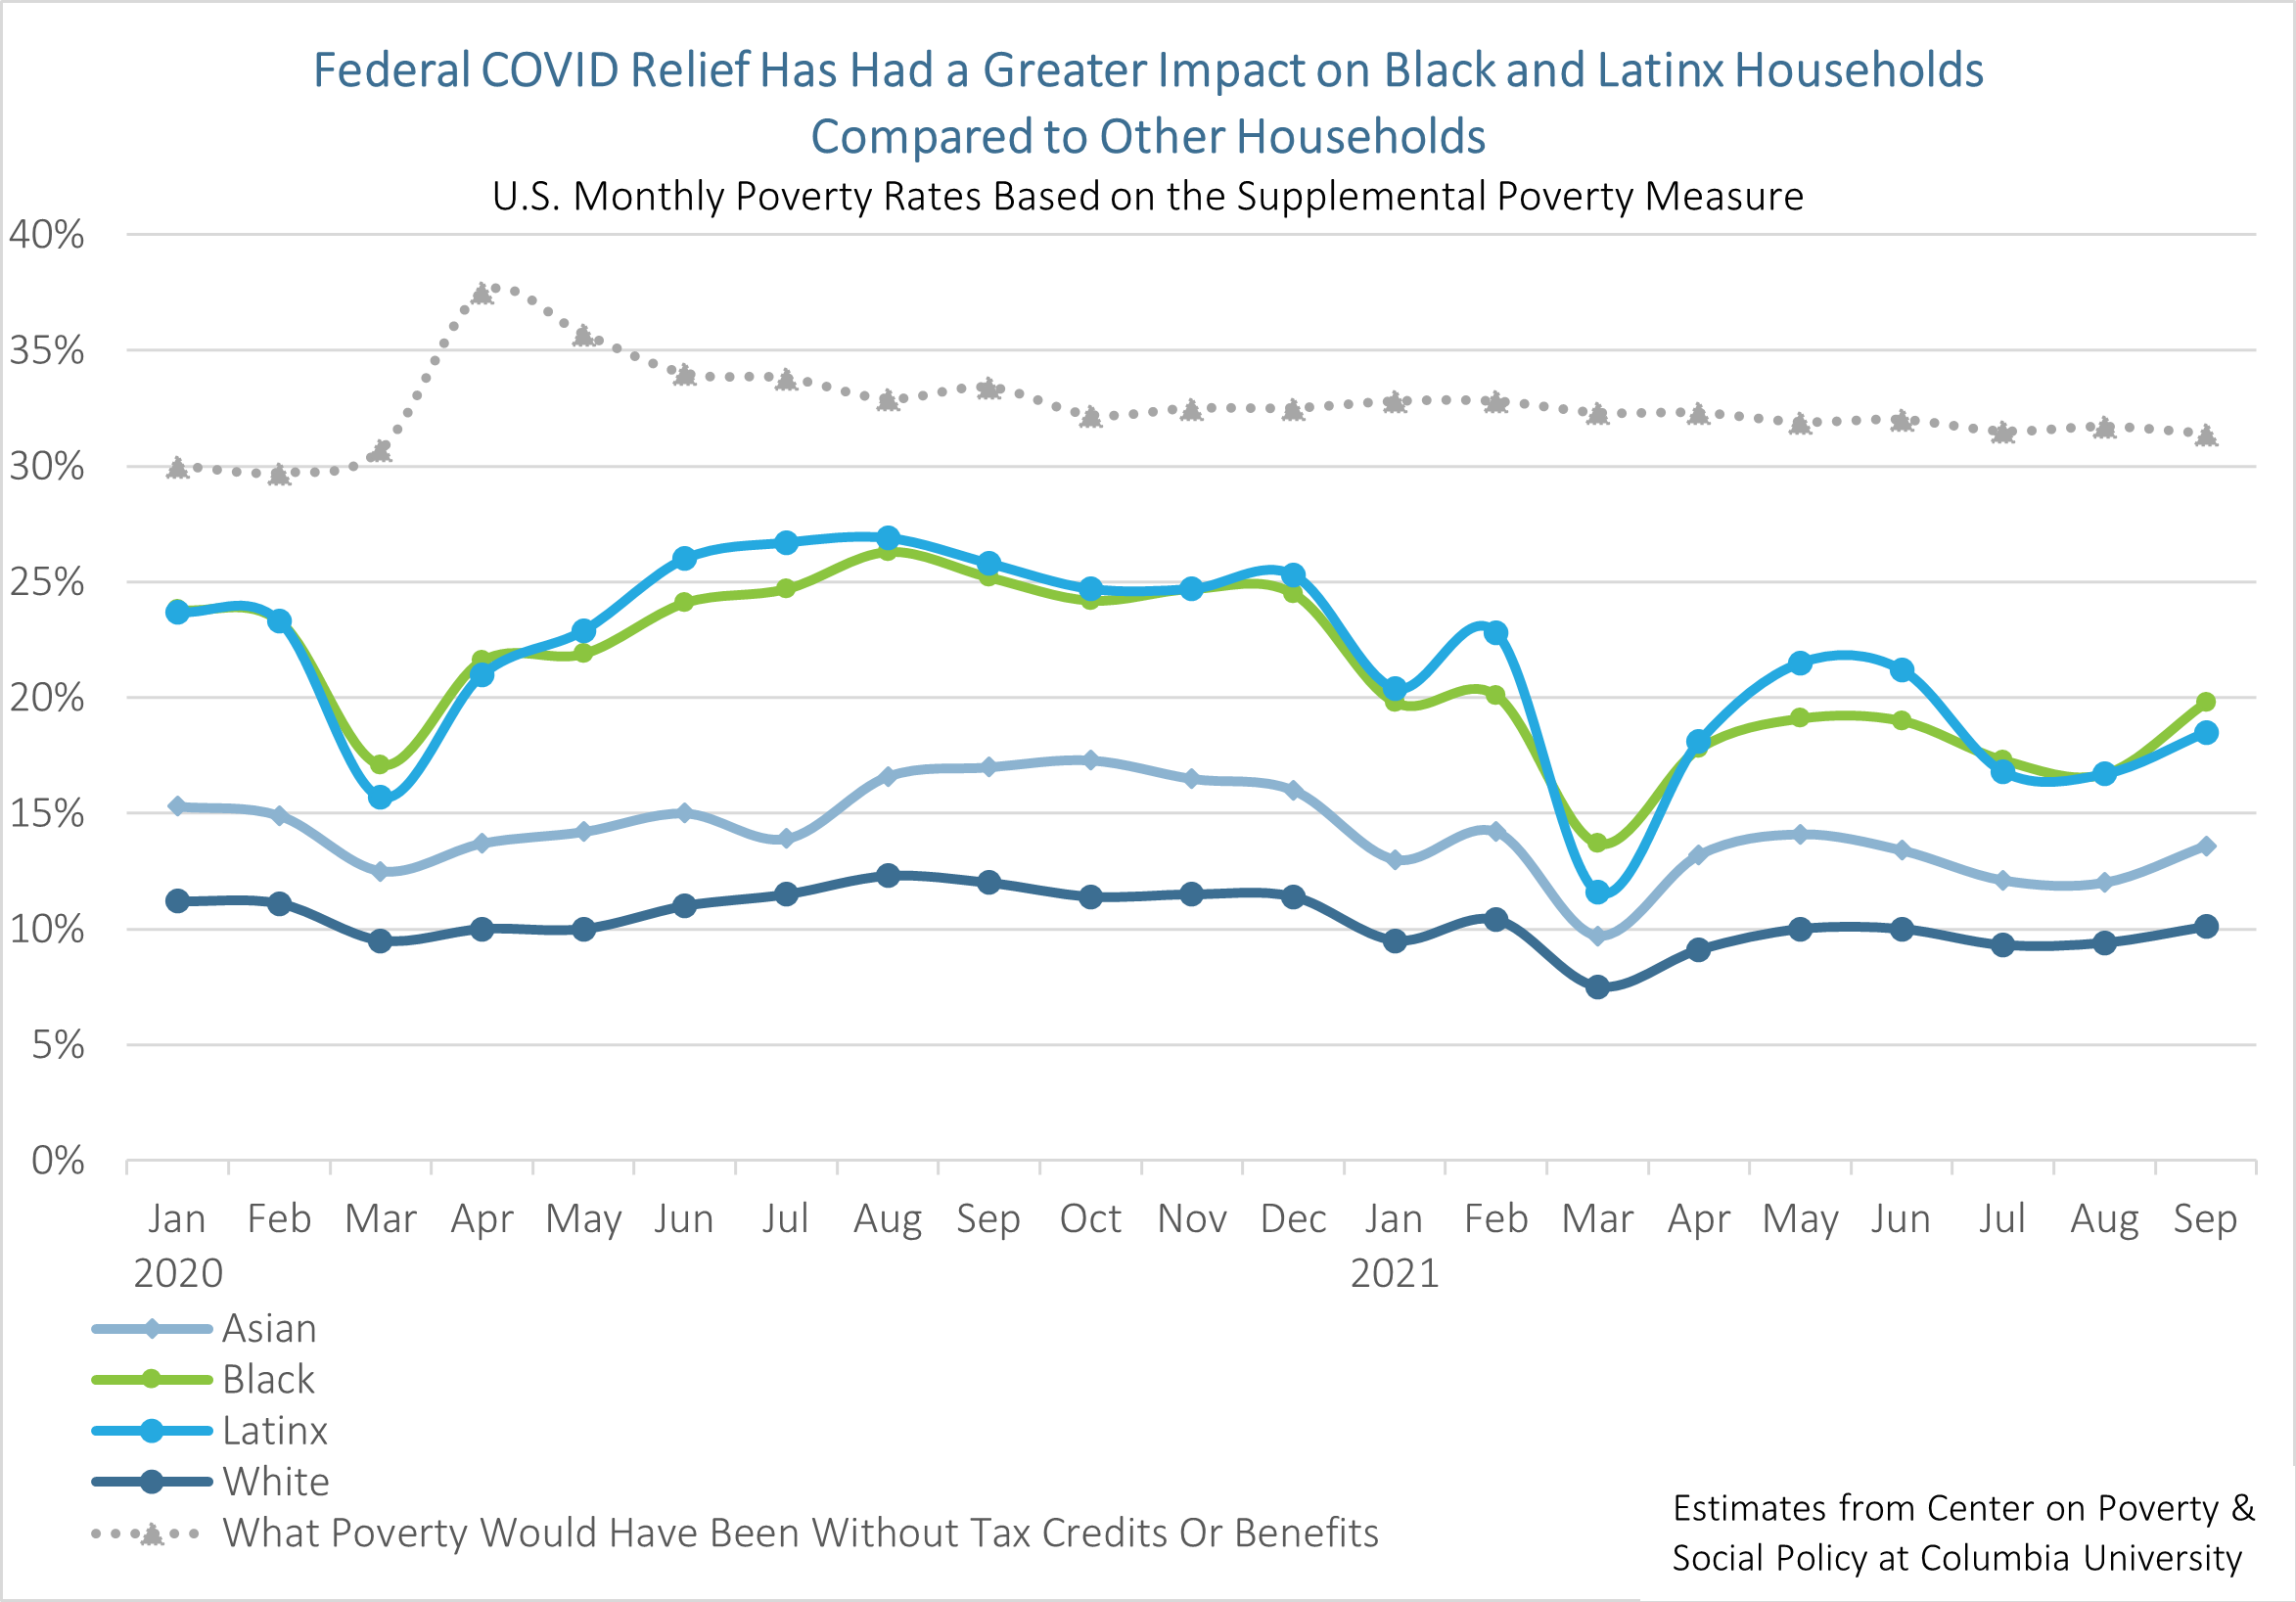 Line chart: Federal COVID Relief Has Had a Greater Impact on Black and Latinx Households Compared to Other Households - US Monthly Poverty Rates Based on the Supplemental Poverty Measure